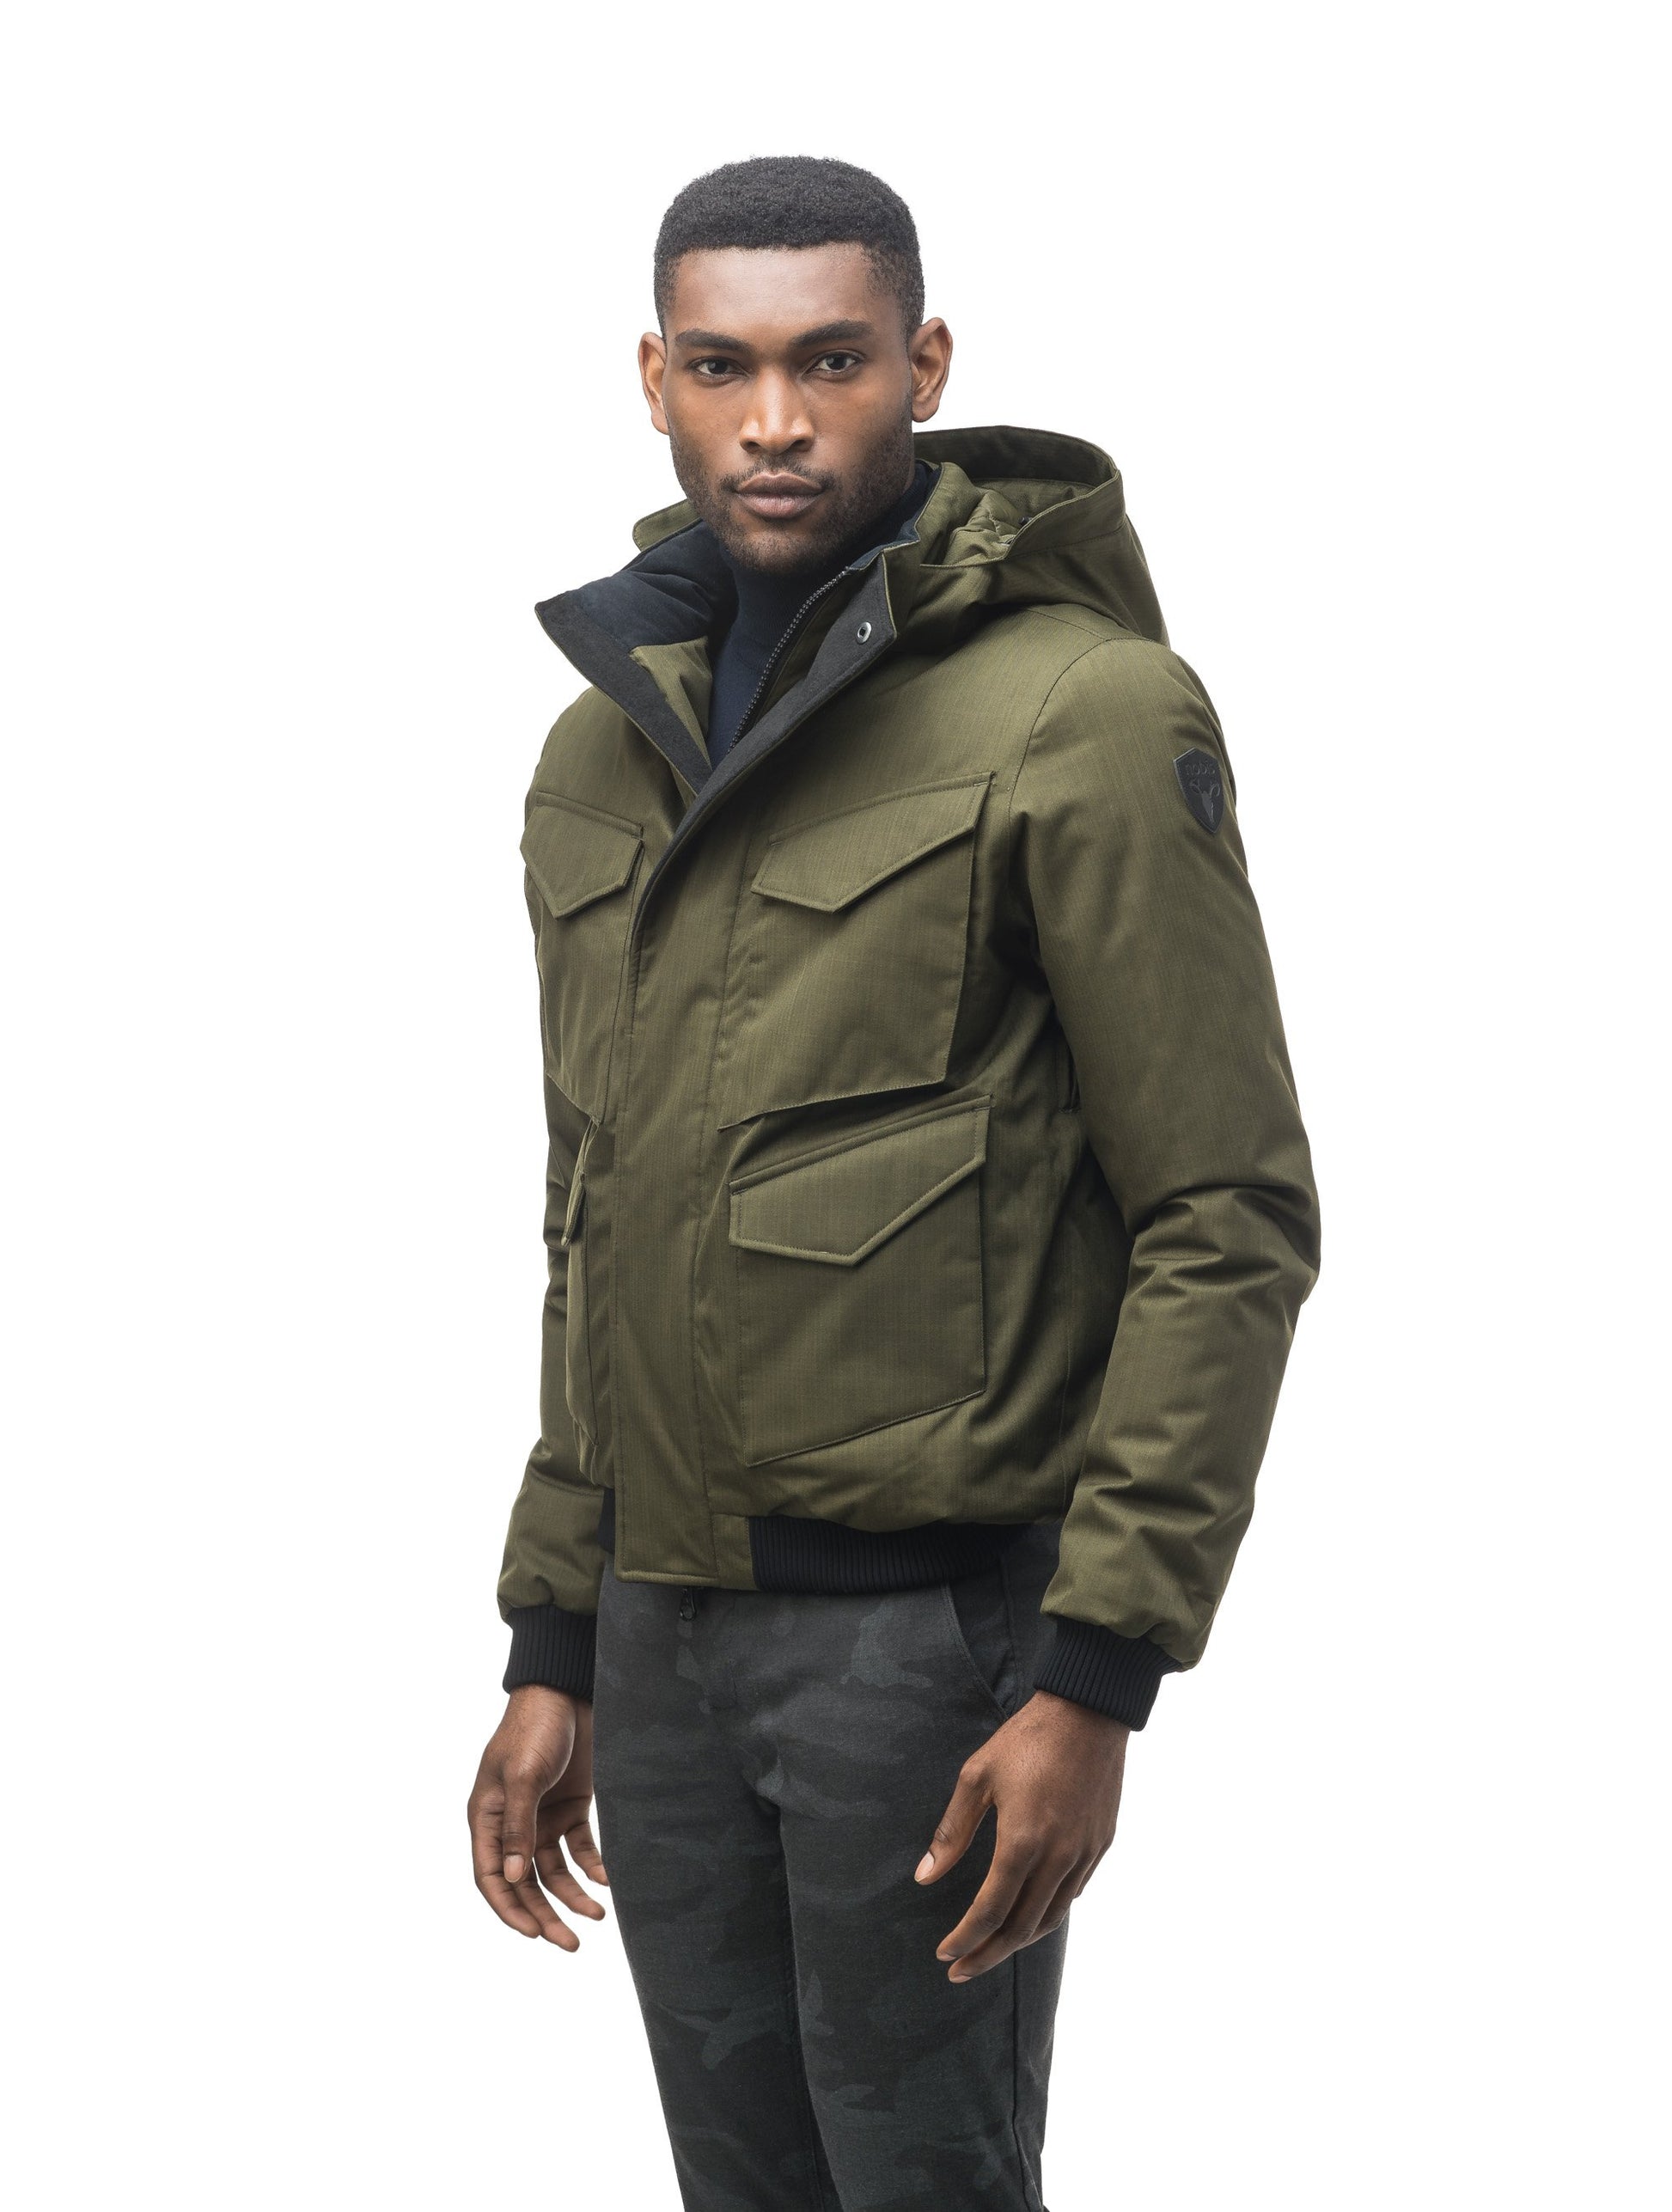 Men's waist length bomber with four huge pockets on the front in Fatigue